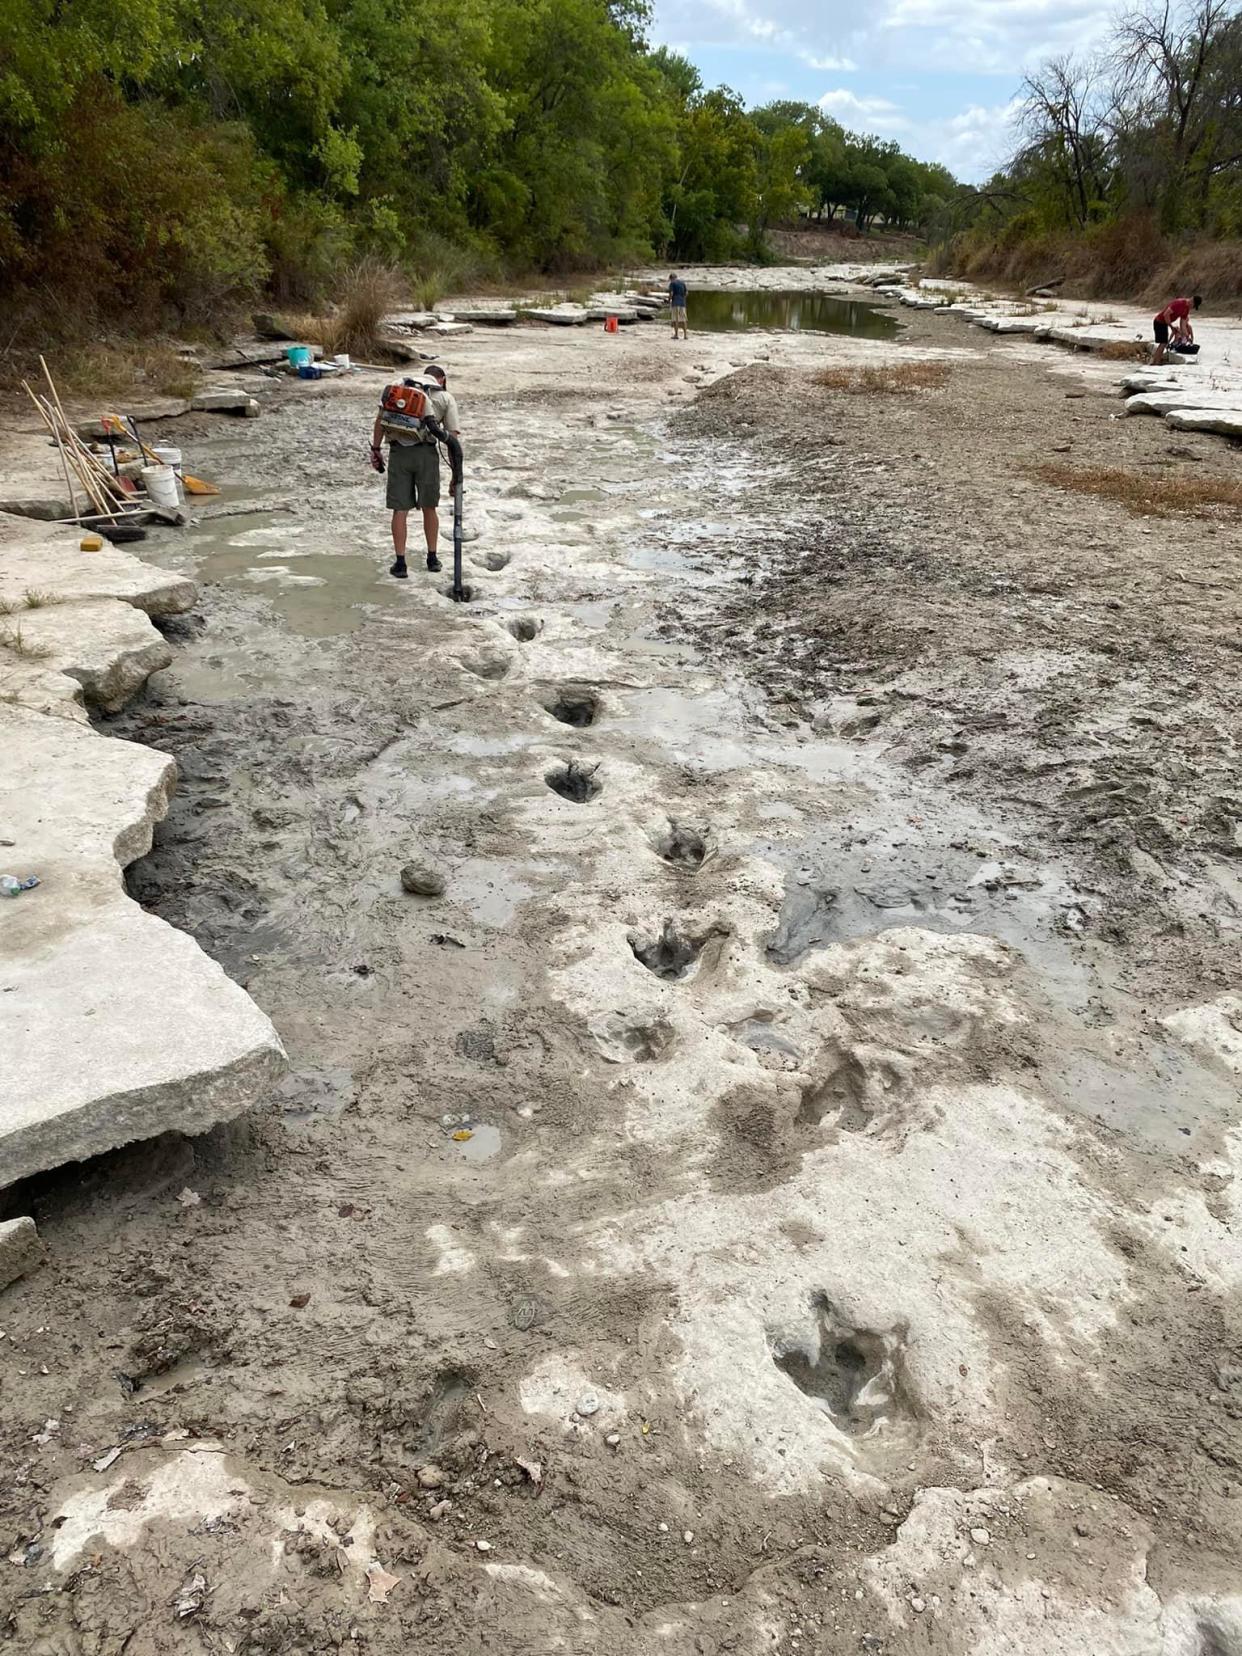 Excessive drought in Texas dried up a river in Dinosaur Valley State Park, exposing new dinosaur tracks that were previously filled with sediment. (Dinosaur Valley Park/Paul Baker)